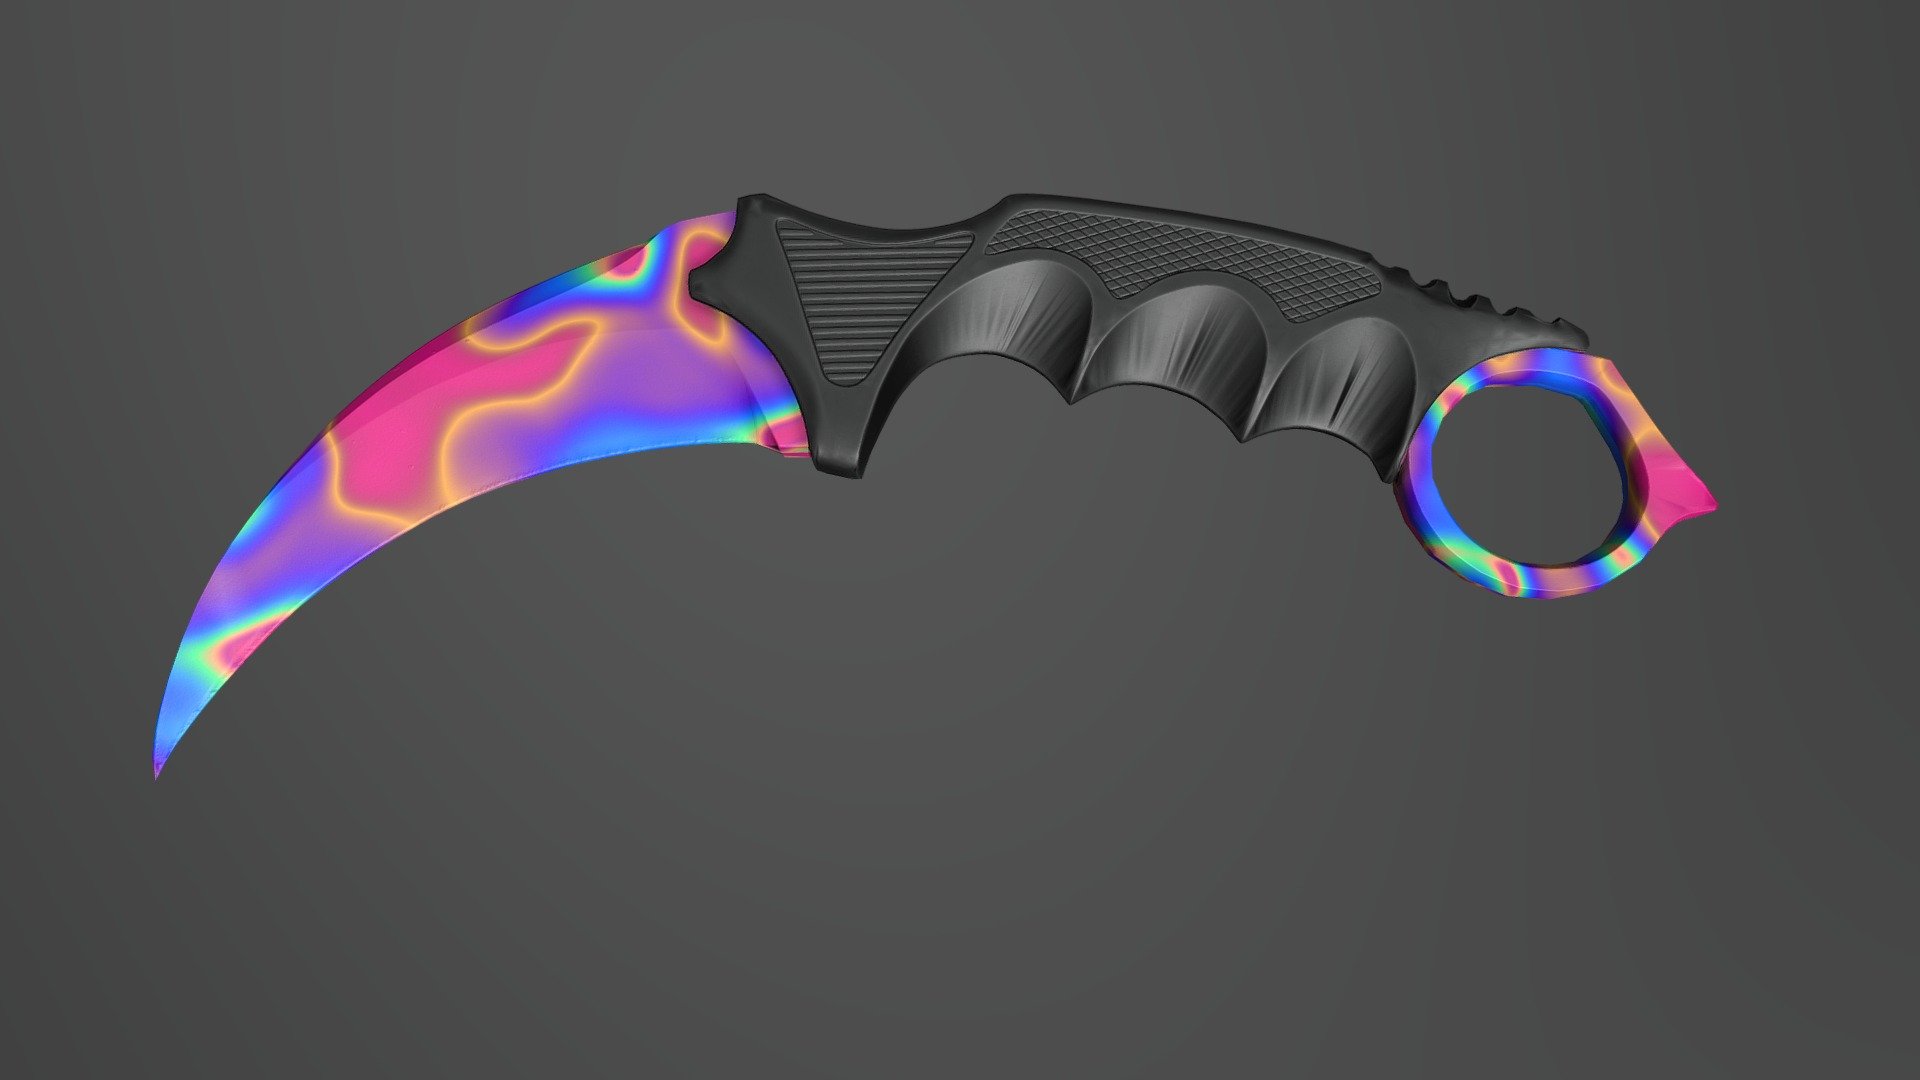 Low Poly Karambit knife, ready for Unreal Engine 4. 
Texture resolution: 4096x4096.

Note: Texture set is for UE4 3d model